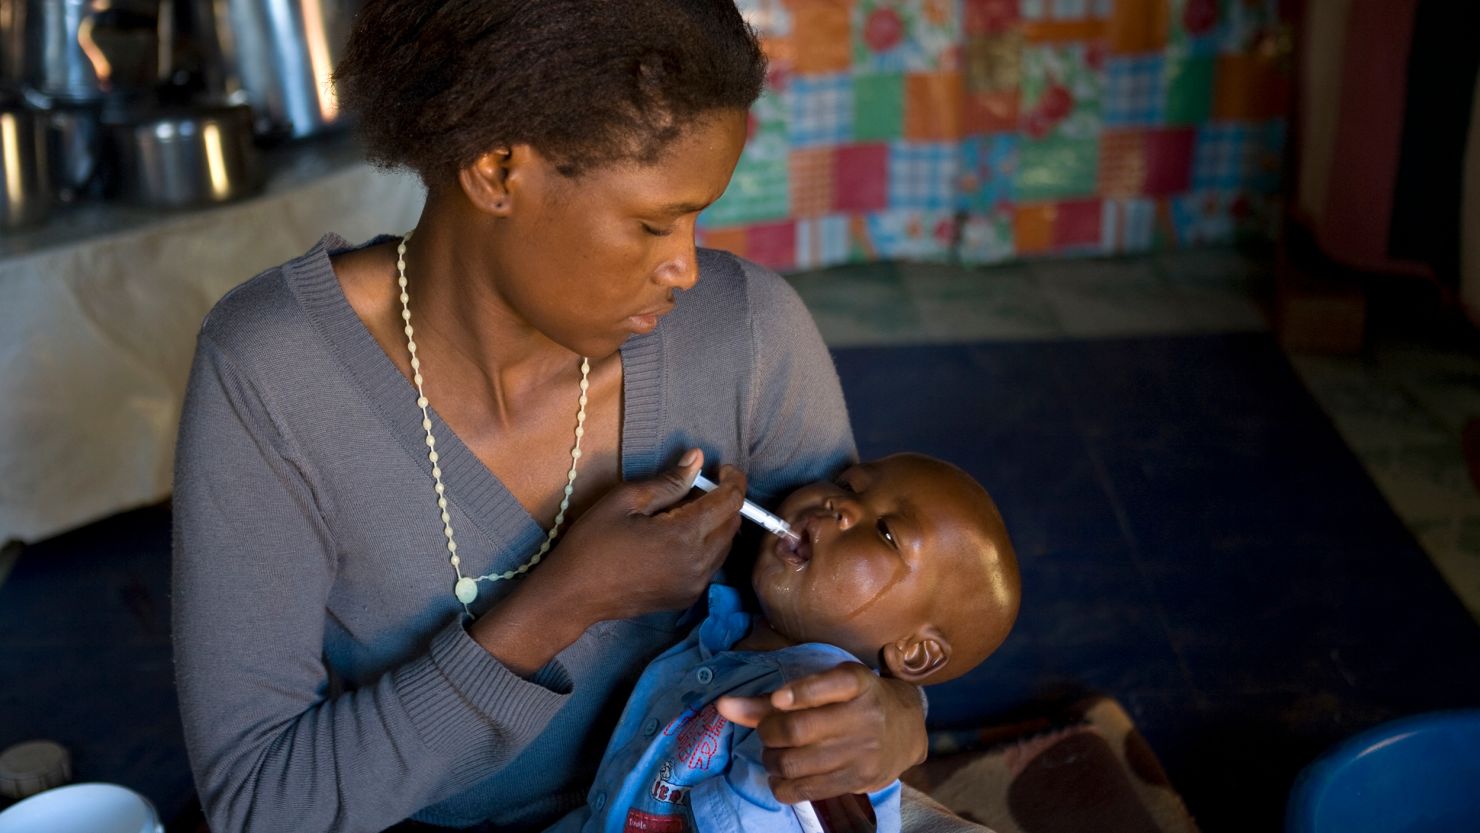 A mother in Lesotho, pictured here in 2007, gives her baby a dose of HIV medicines. In the first half of 2021, a pediatric formulation of dolutegravir, a drug recommended as first-line HIV treatment by the World Health Organization, will become available in some countries.